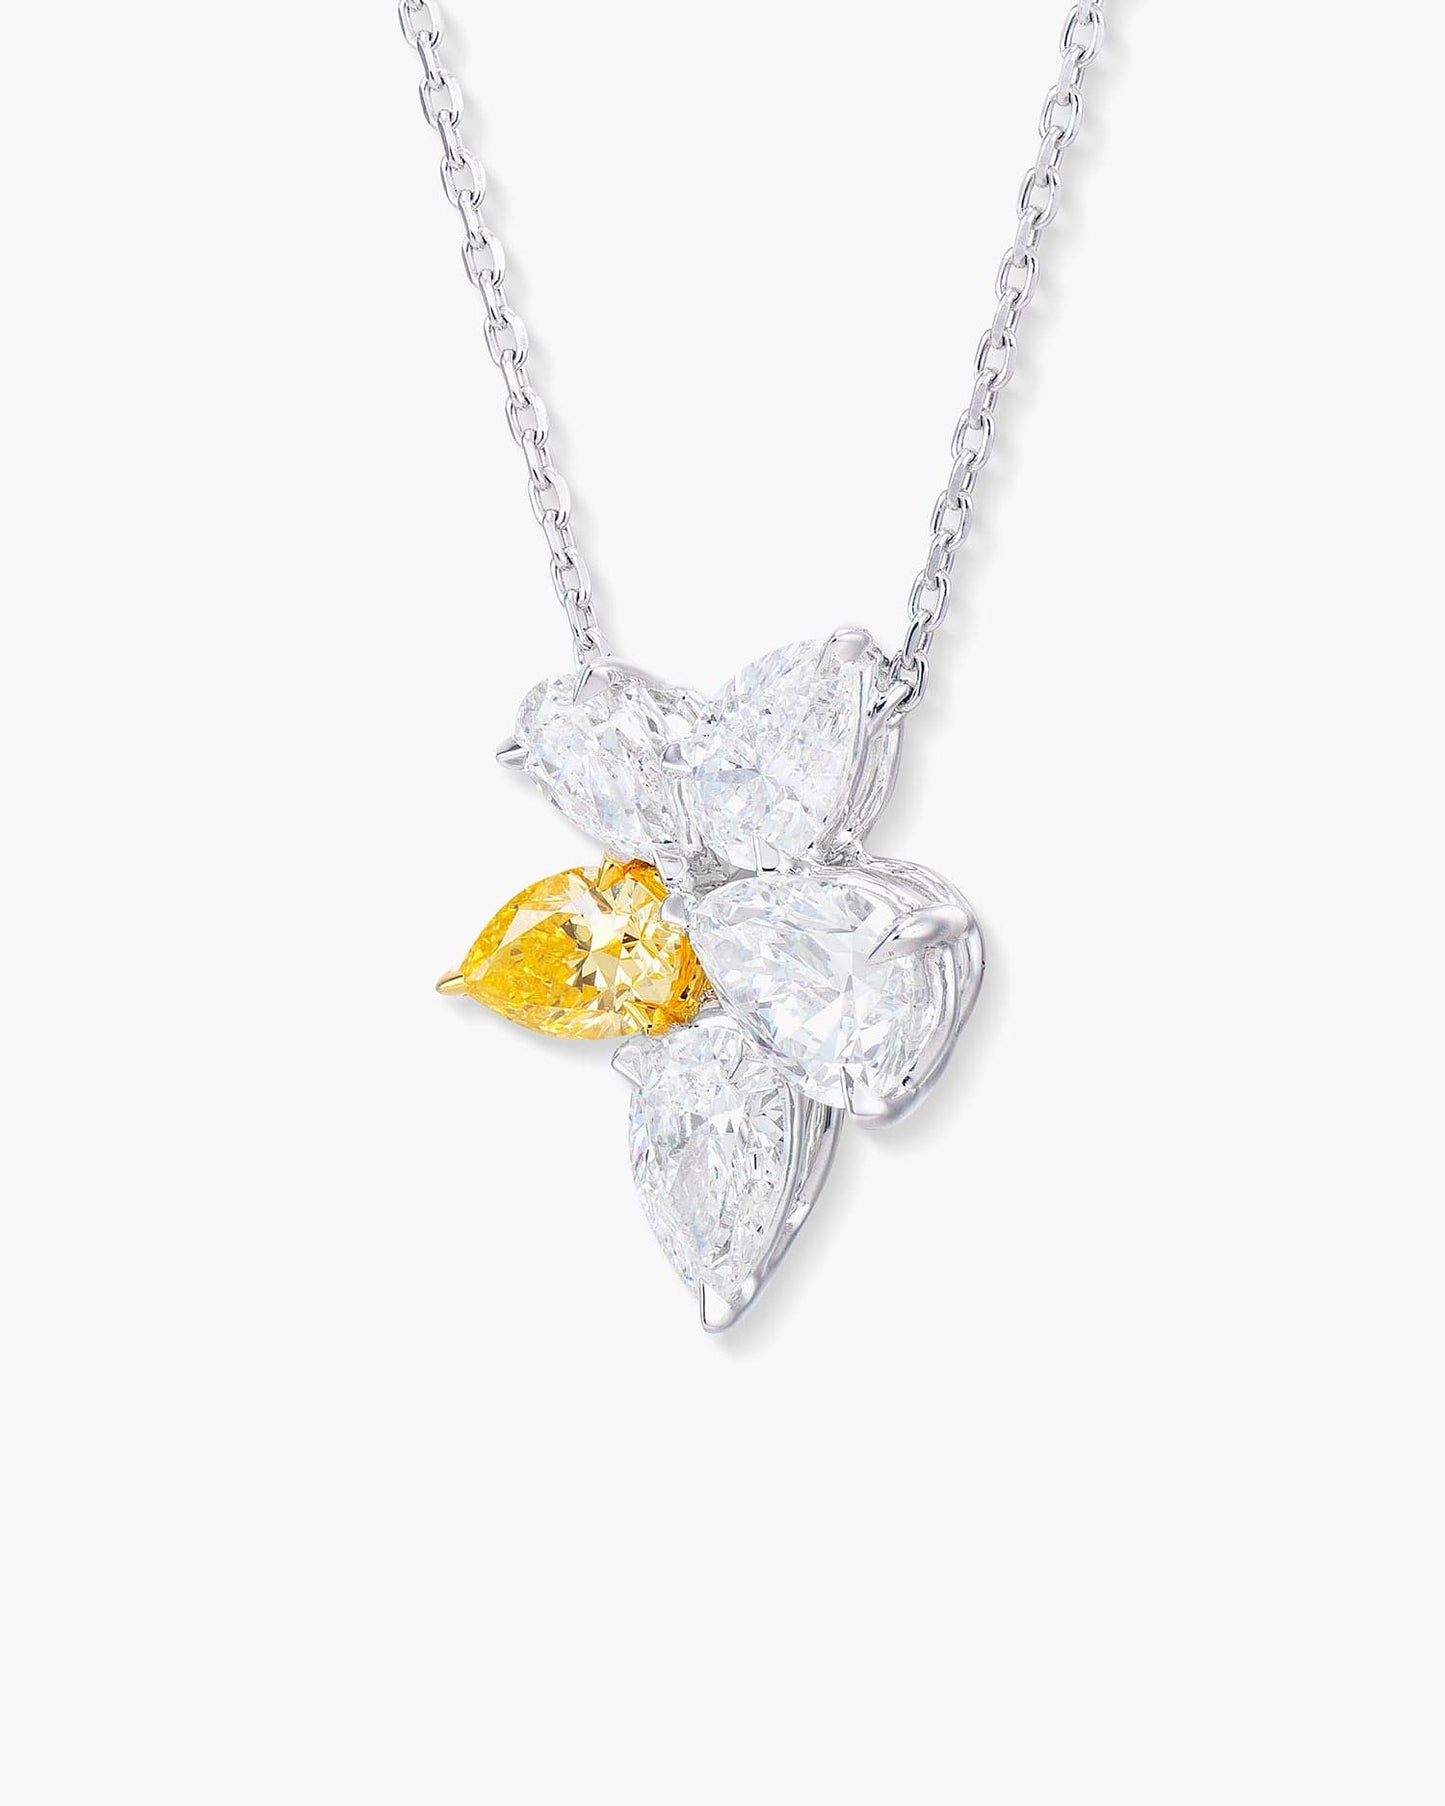 Yellow and White Diamond Cluster Pendant Necklace, 2.05 carats